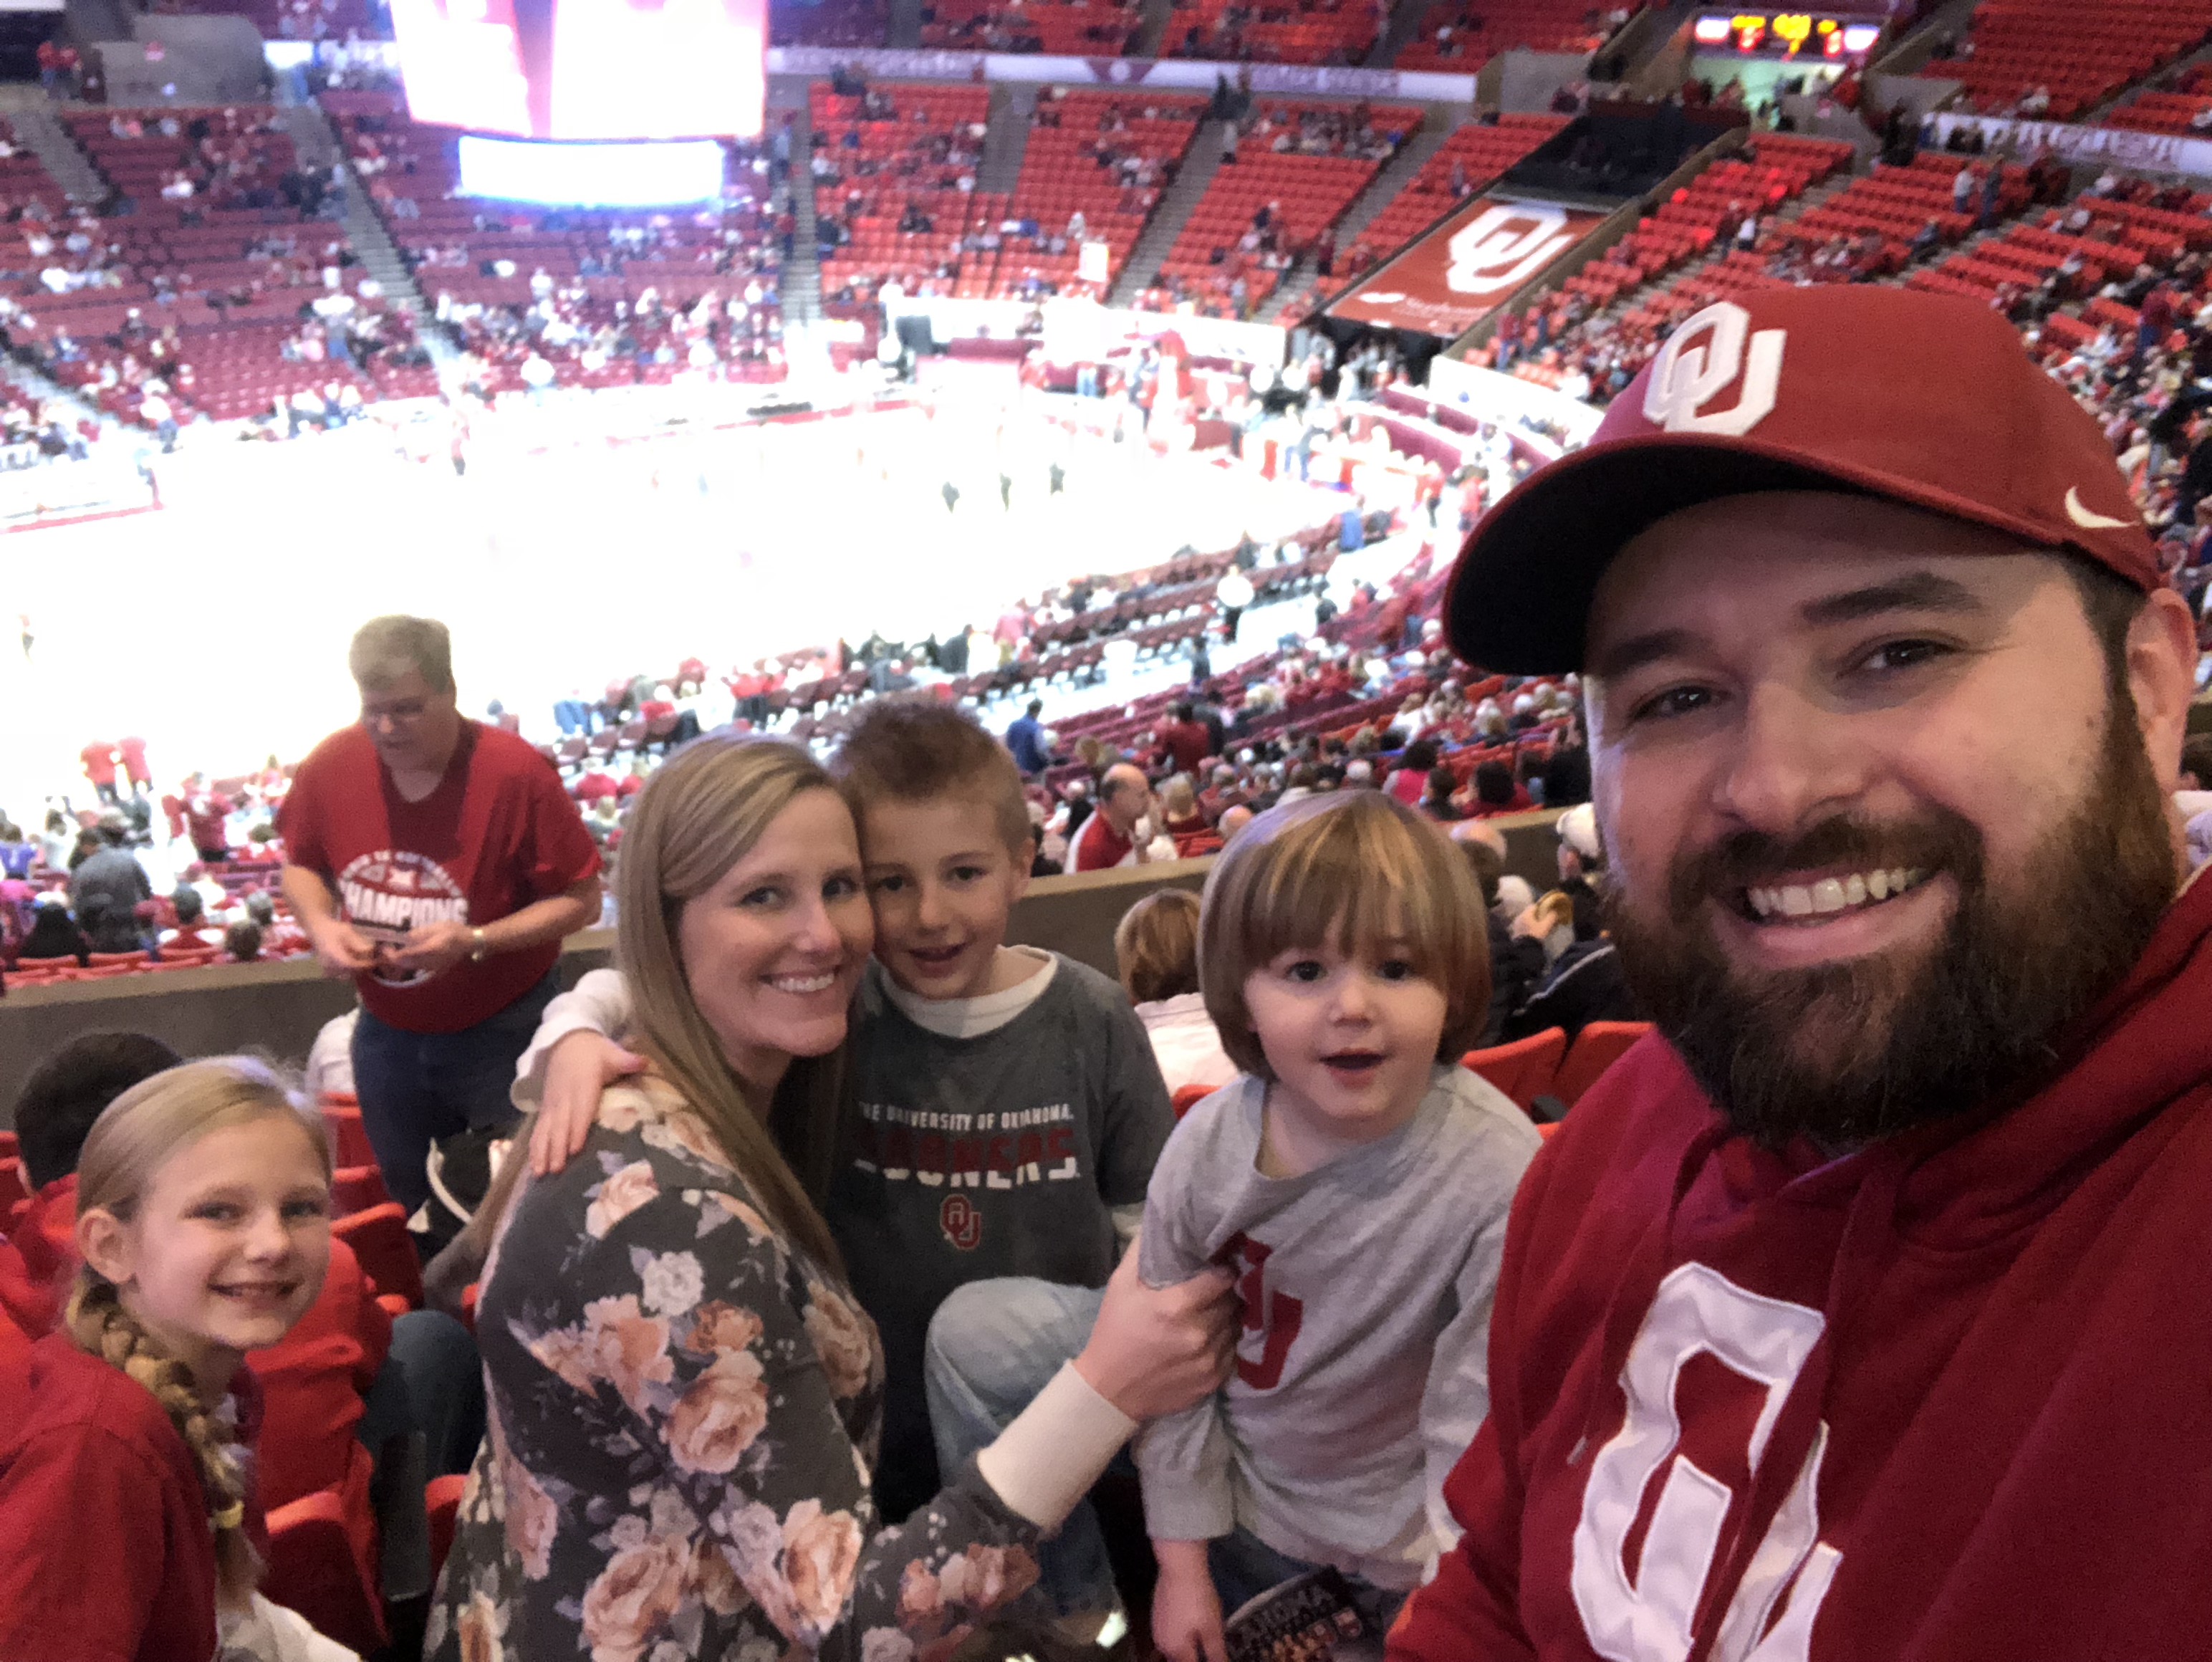 Michael and his family at a University of Oklahoma Sooners basketball game in January 2019.